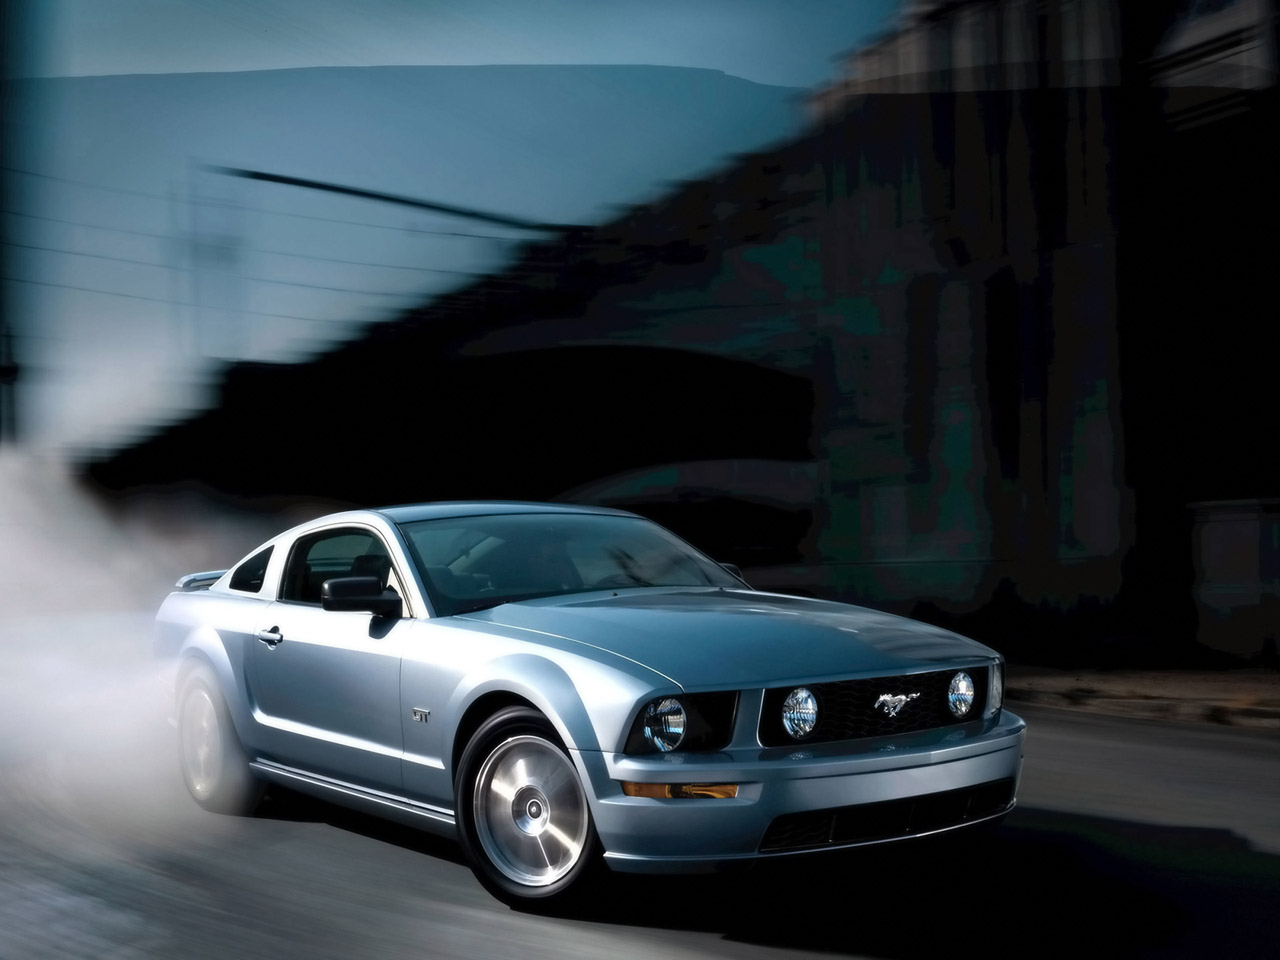 Ford Mustang Gt Coupe 2005 1280x960 Wallpaper Teahub Io